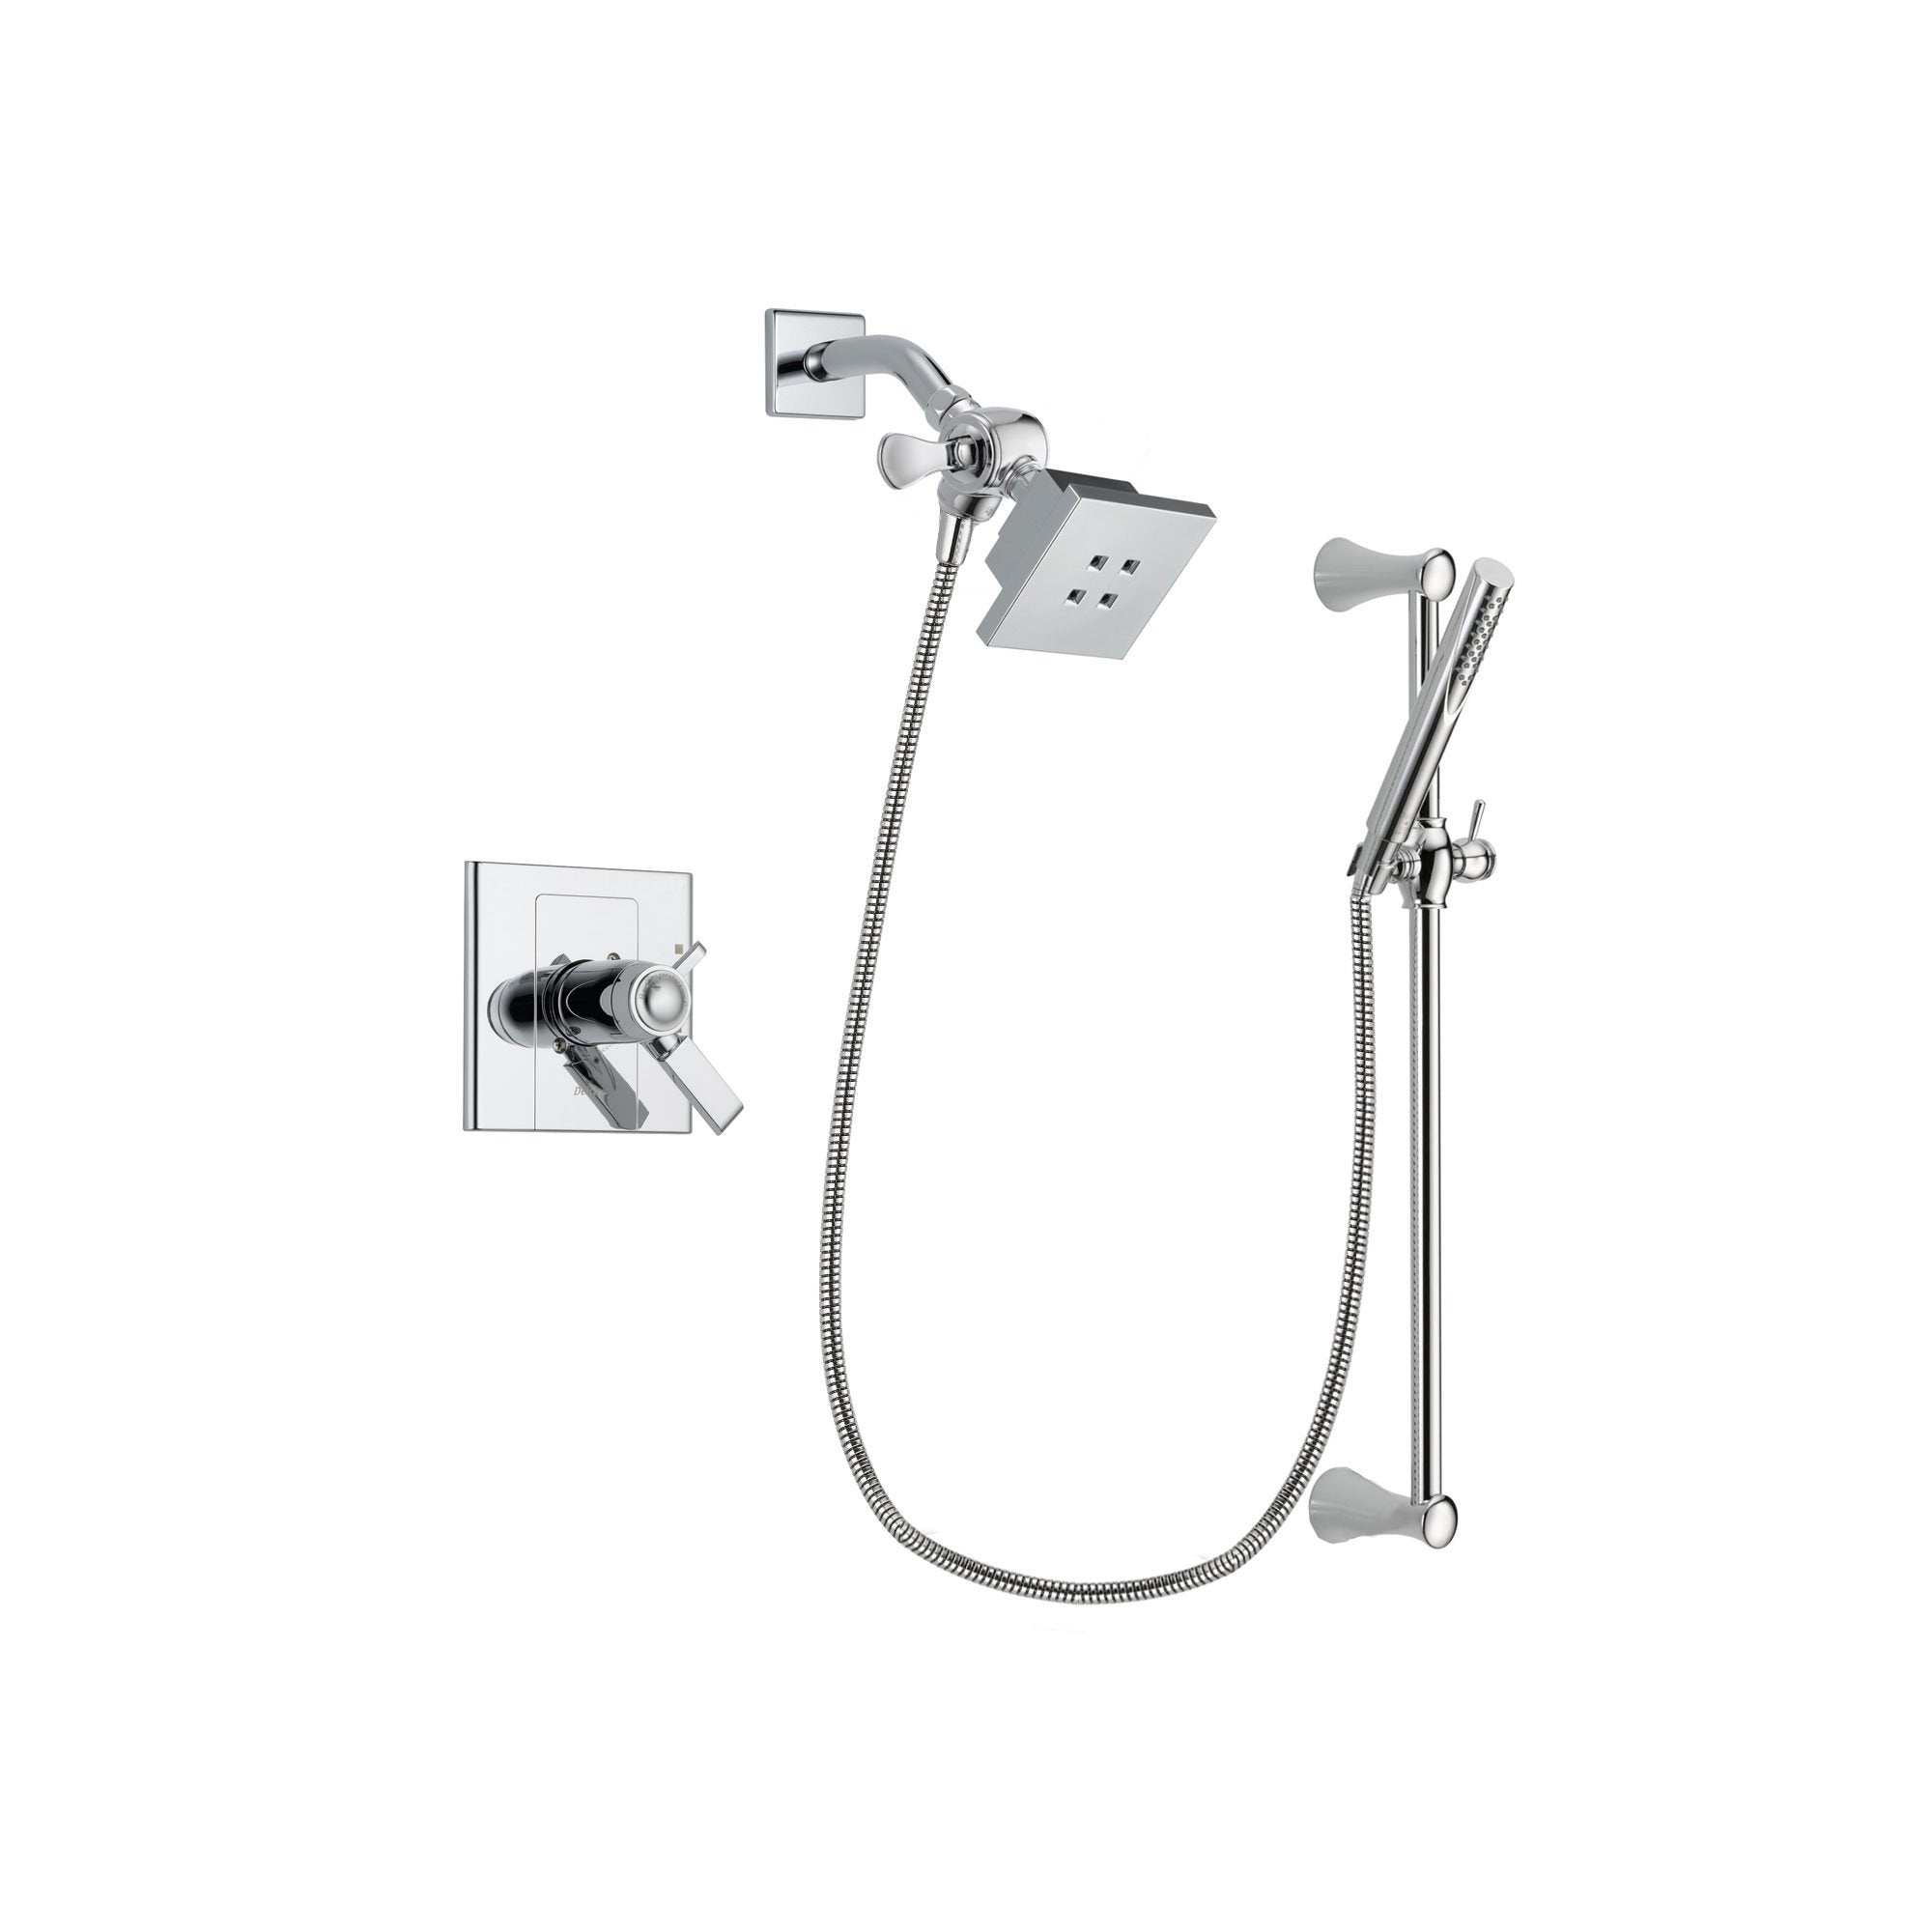 Delta Arzo Chrome Finish Thermostatic Shower Faucet System Package with Square Showerhead and Modern Wall Mount Slide Bar with Handheld Shower Spray Includes Rough-in Valve DSP0245V